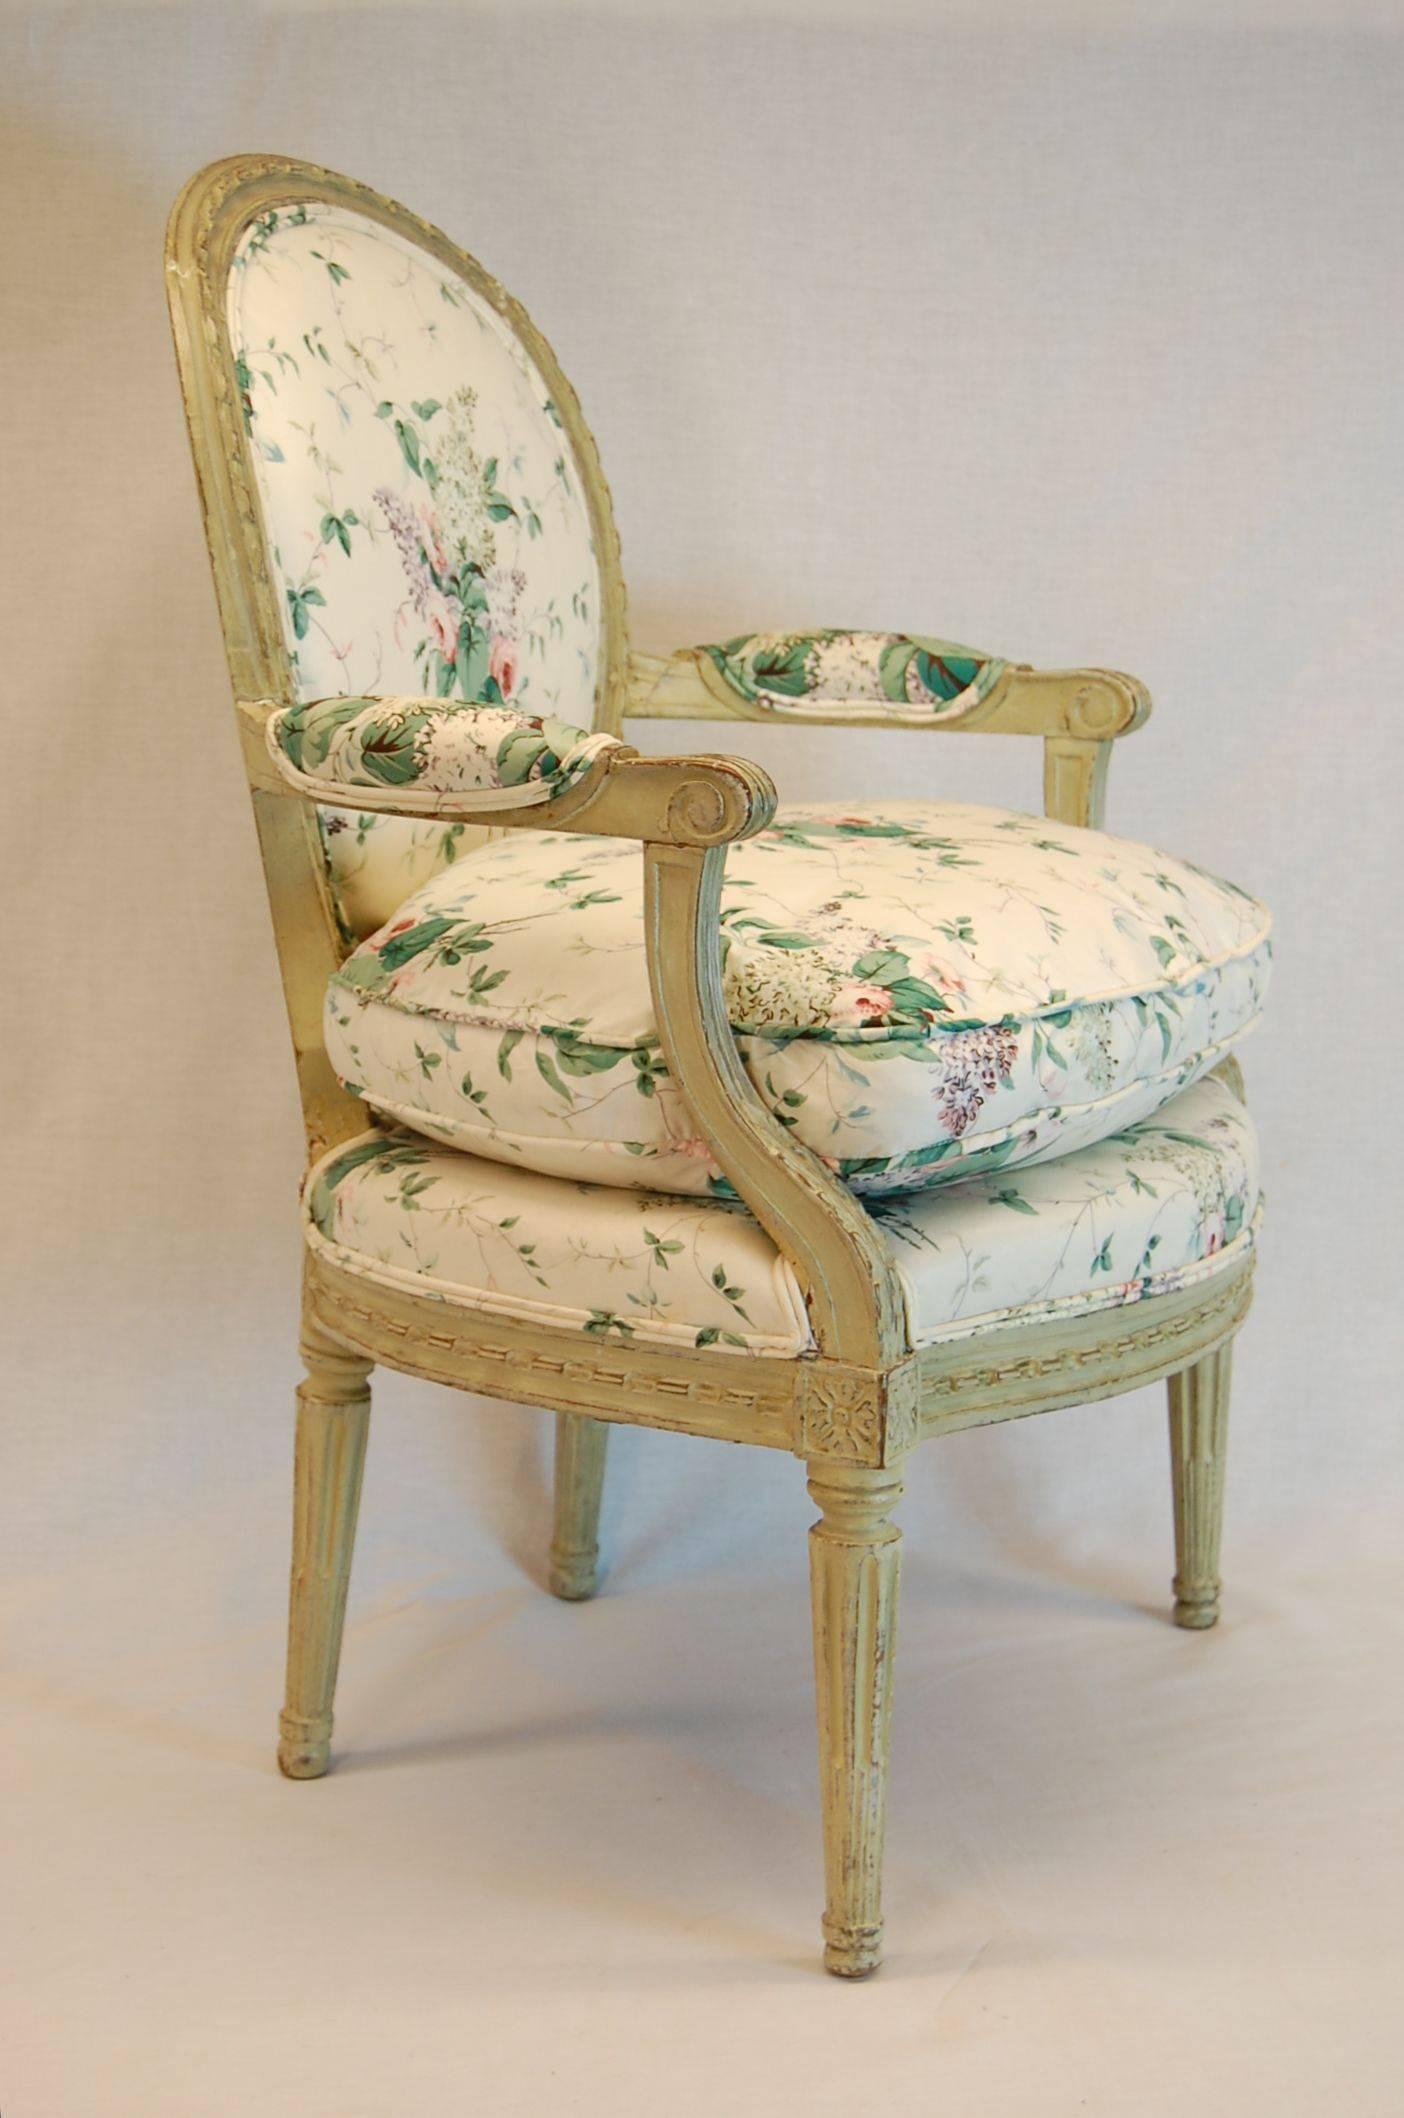 Louis XVI carved wood & hand pegged Fauteuil in original green painted finish, currently covered in printed cotton chintz. Very nice carved ribbon details around the back and apron as well as carved Acanthus leaves along the front of the arm.